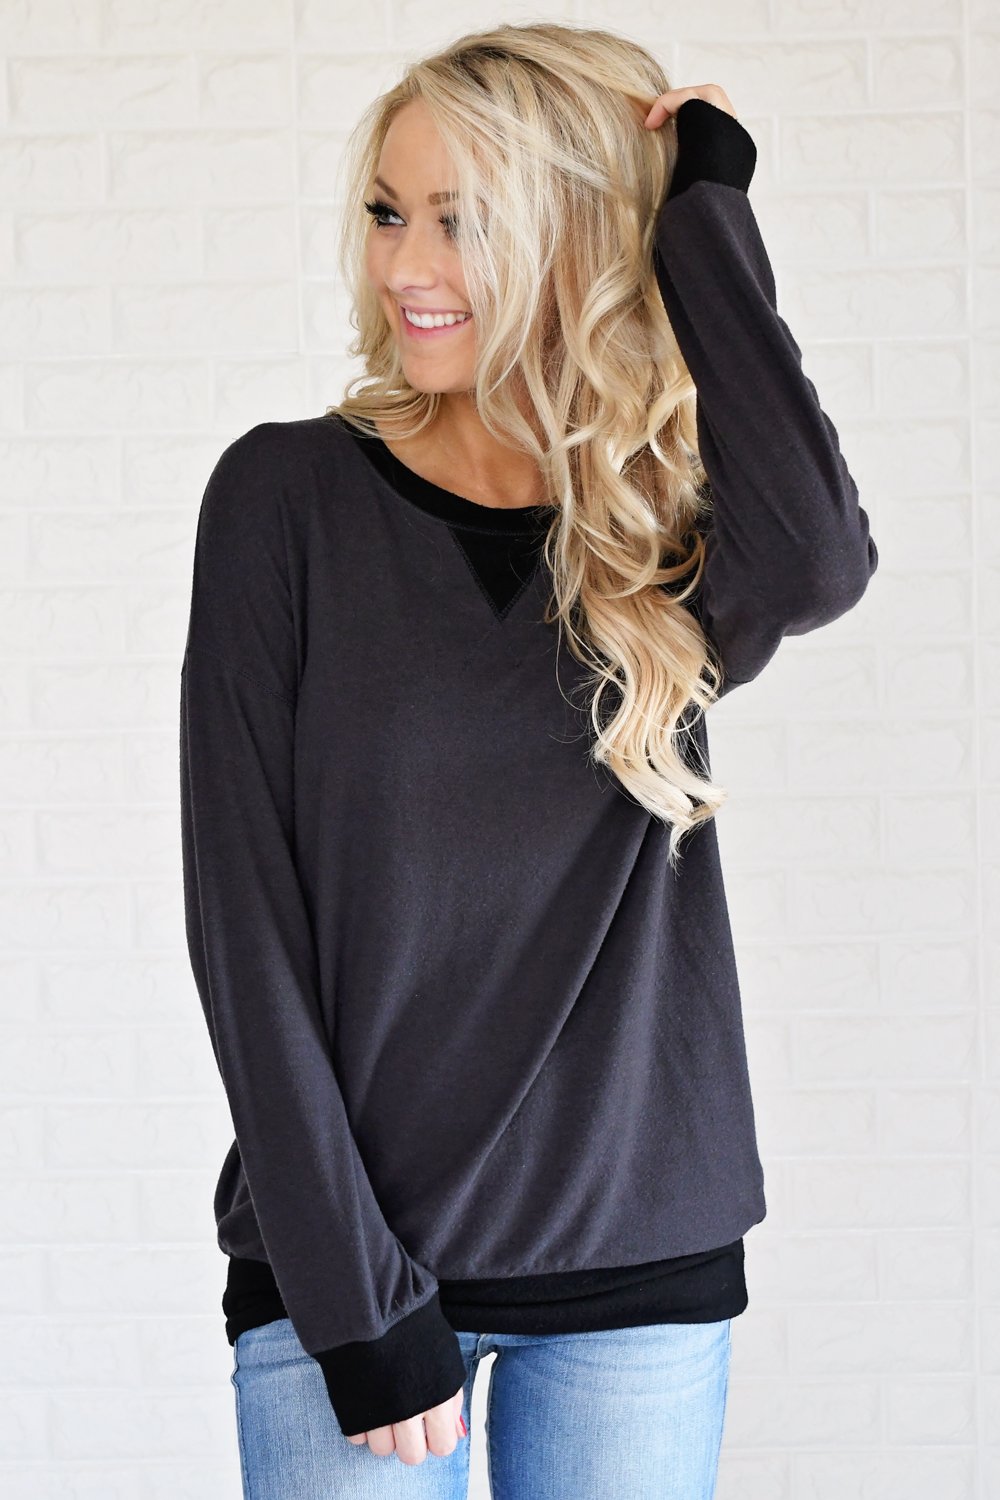 Fall for Cozy Top ~ Charcoal